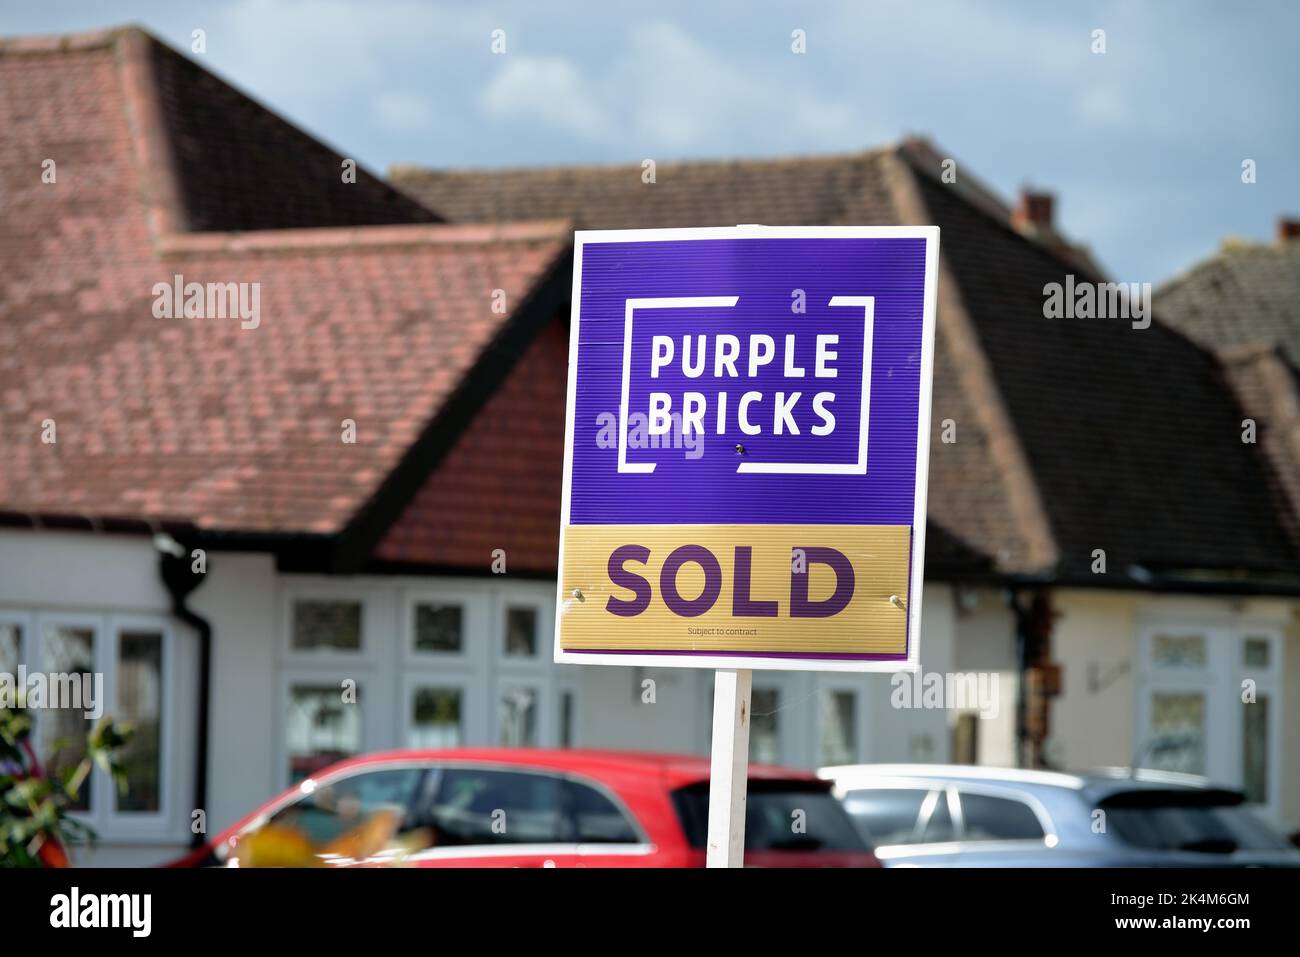 A 'Purple Bricks' online estate agents 'Sold' sign outside a suburban house in Shepperton Surrey England UK Stock Photo